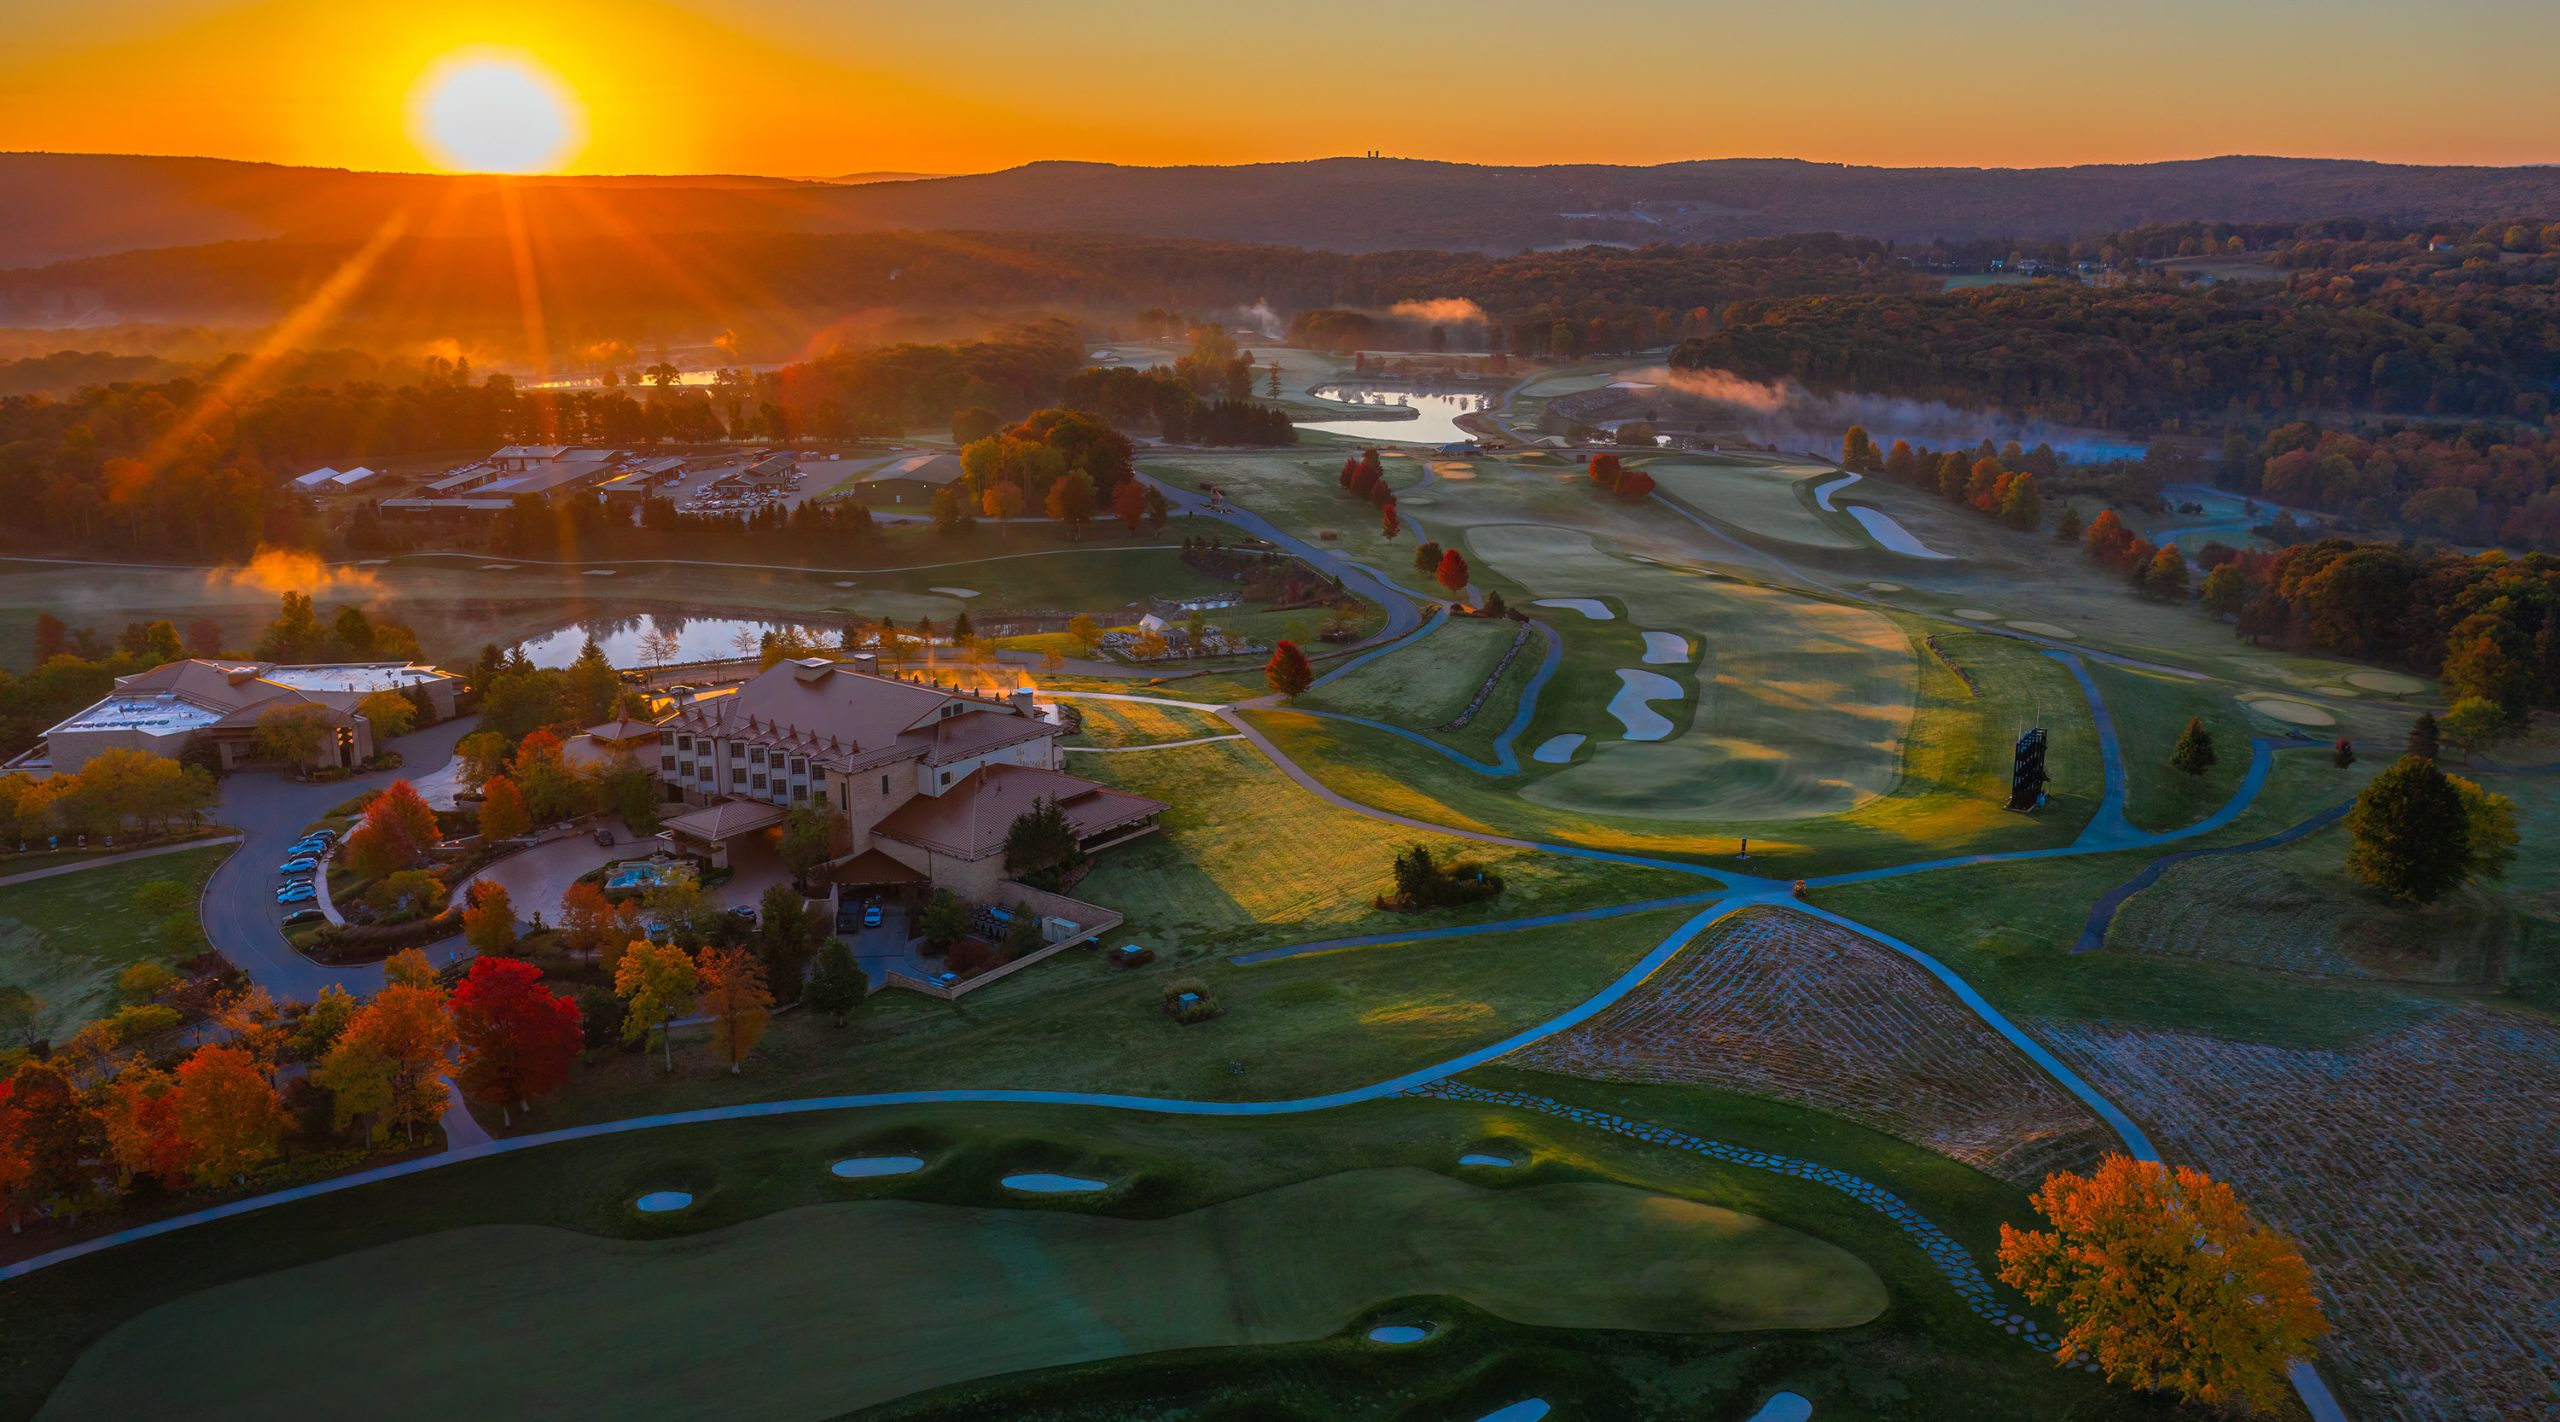 Sunrise over Nemacolin, one of Conde Nast's top resorts in the Northeast and Mid-Atlantic regions